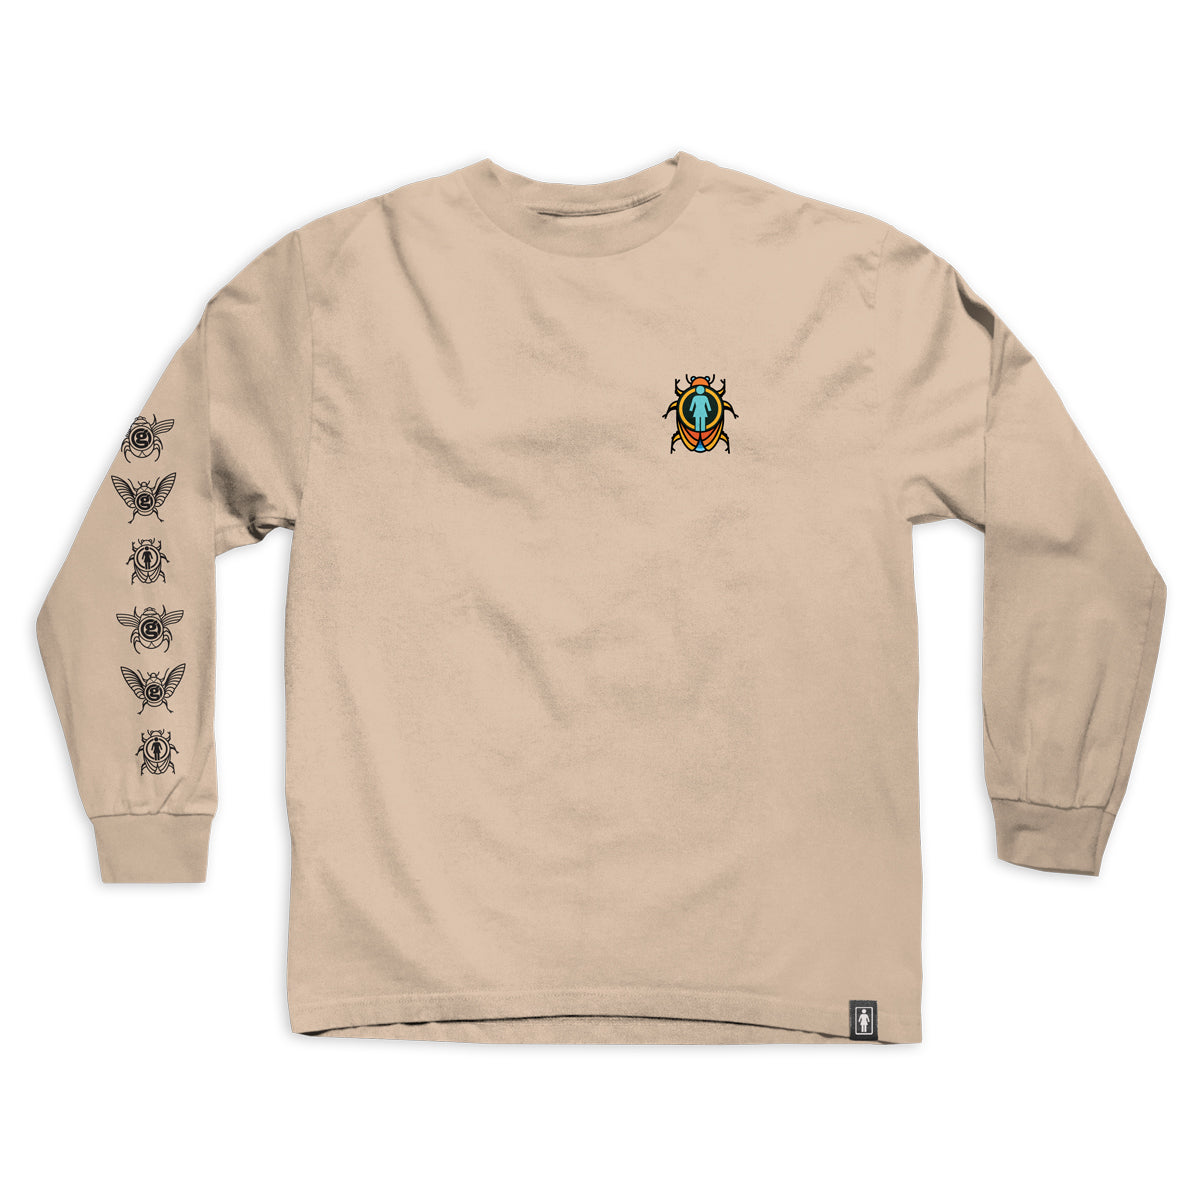 Beetle Attack L/S Tee